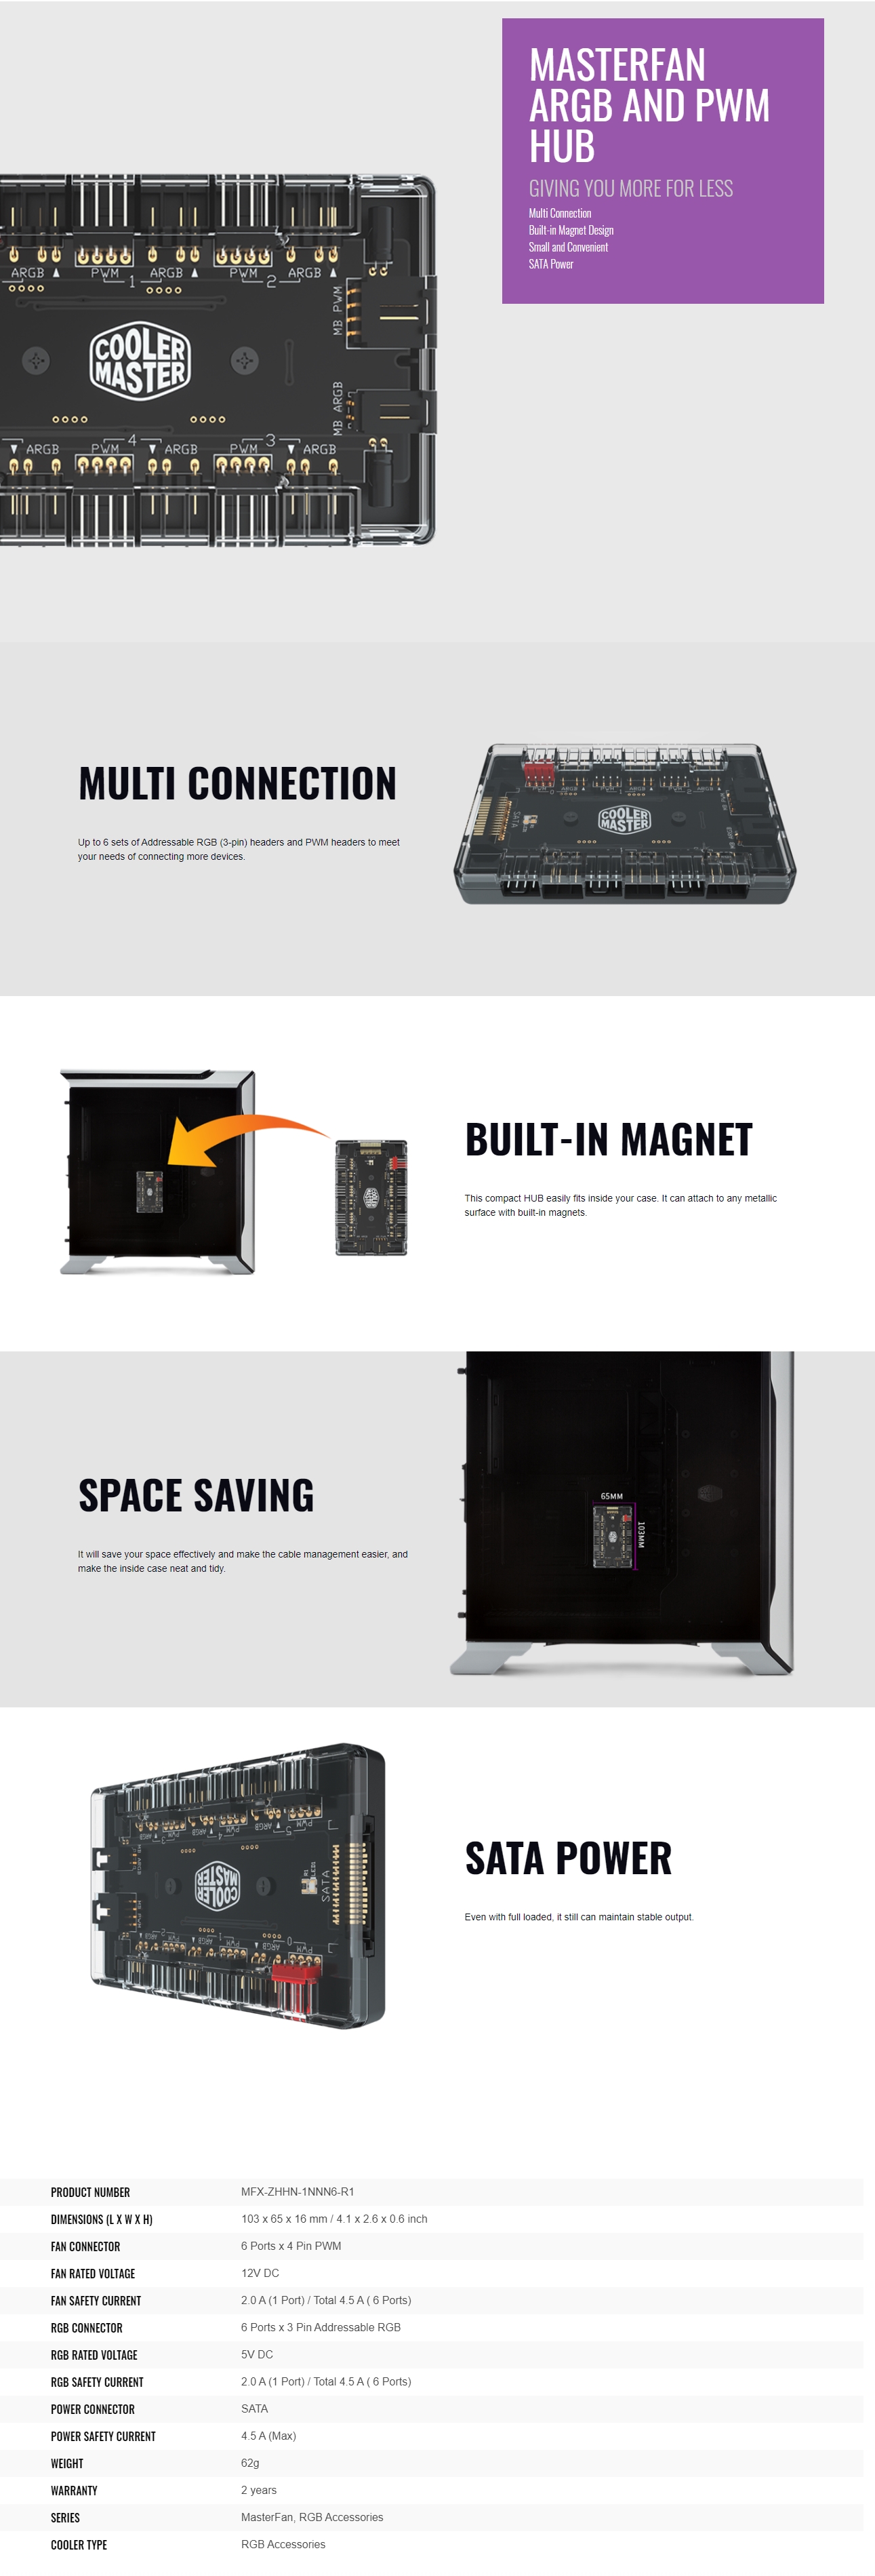 A large marketing image providing additional information about the product Cooler Master Addressable RGB & PWM Hub - Additional alt info not provided